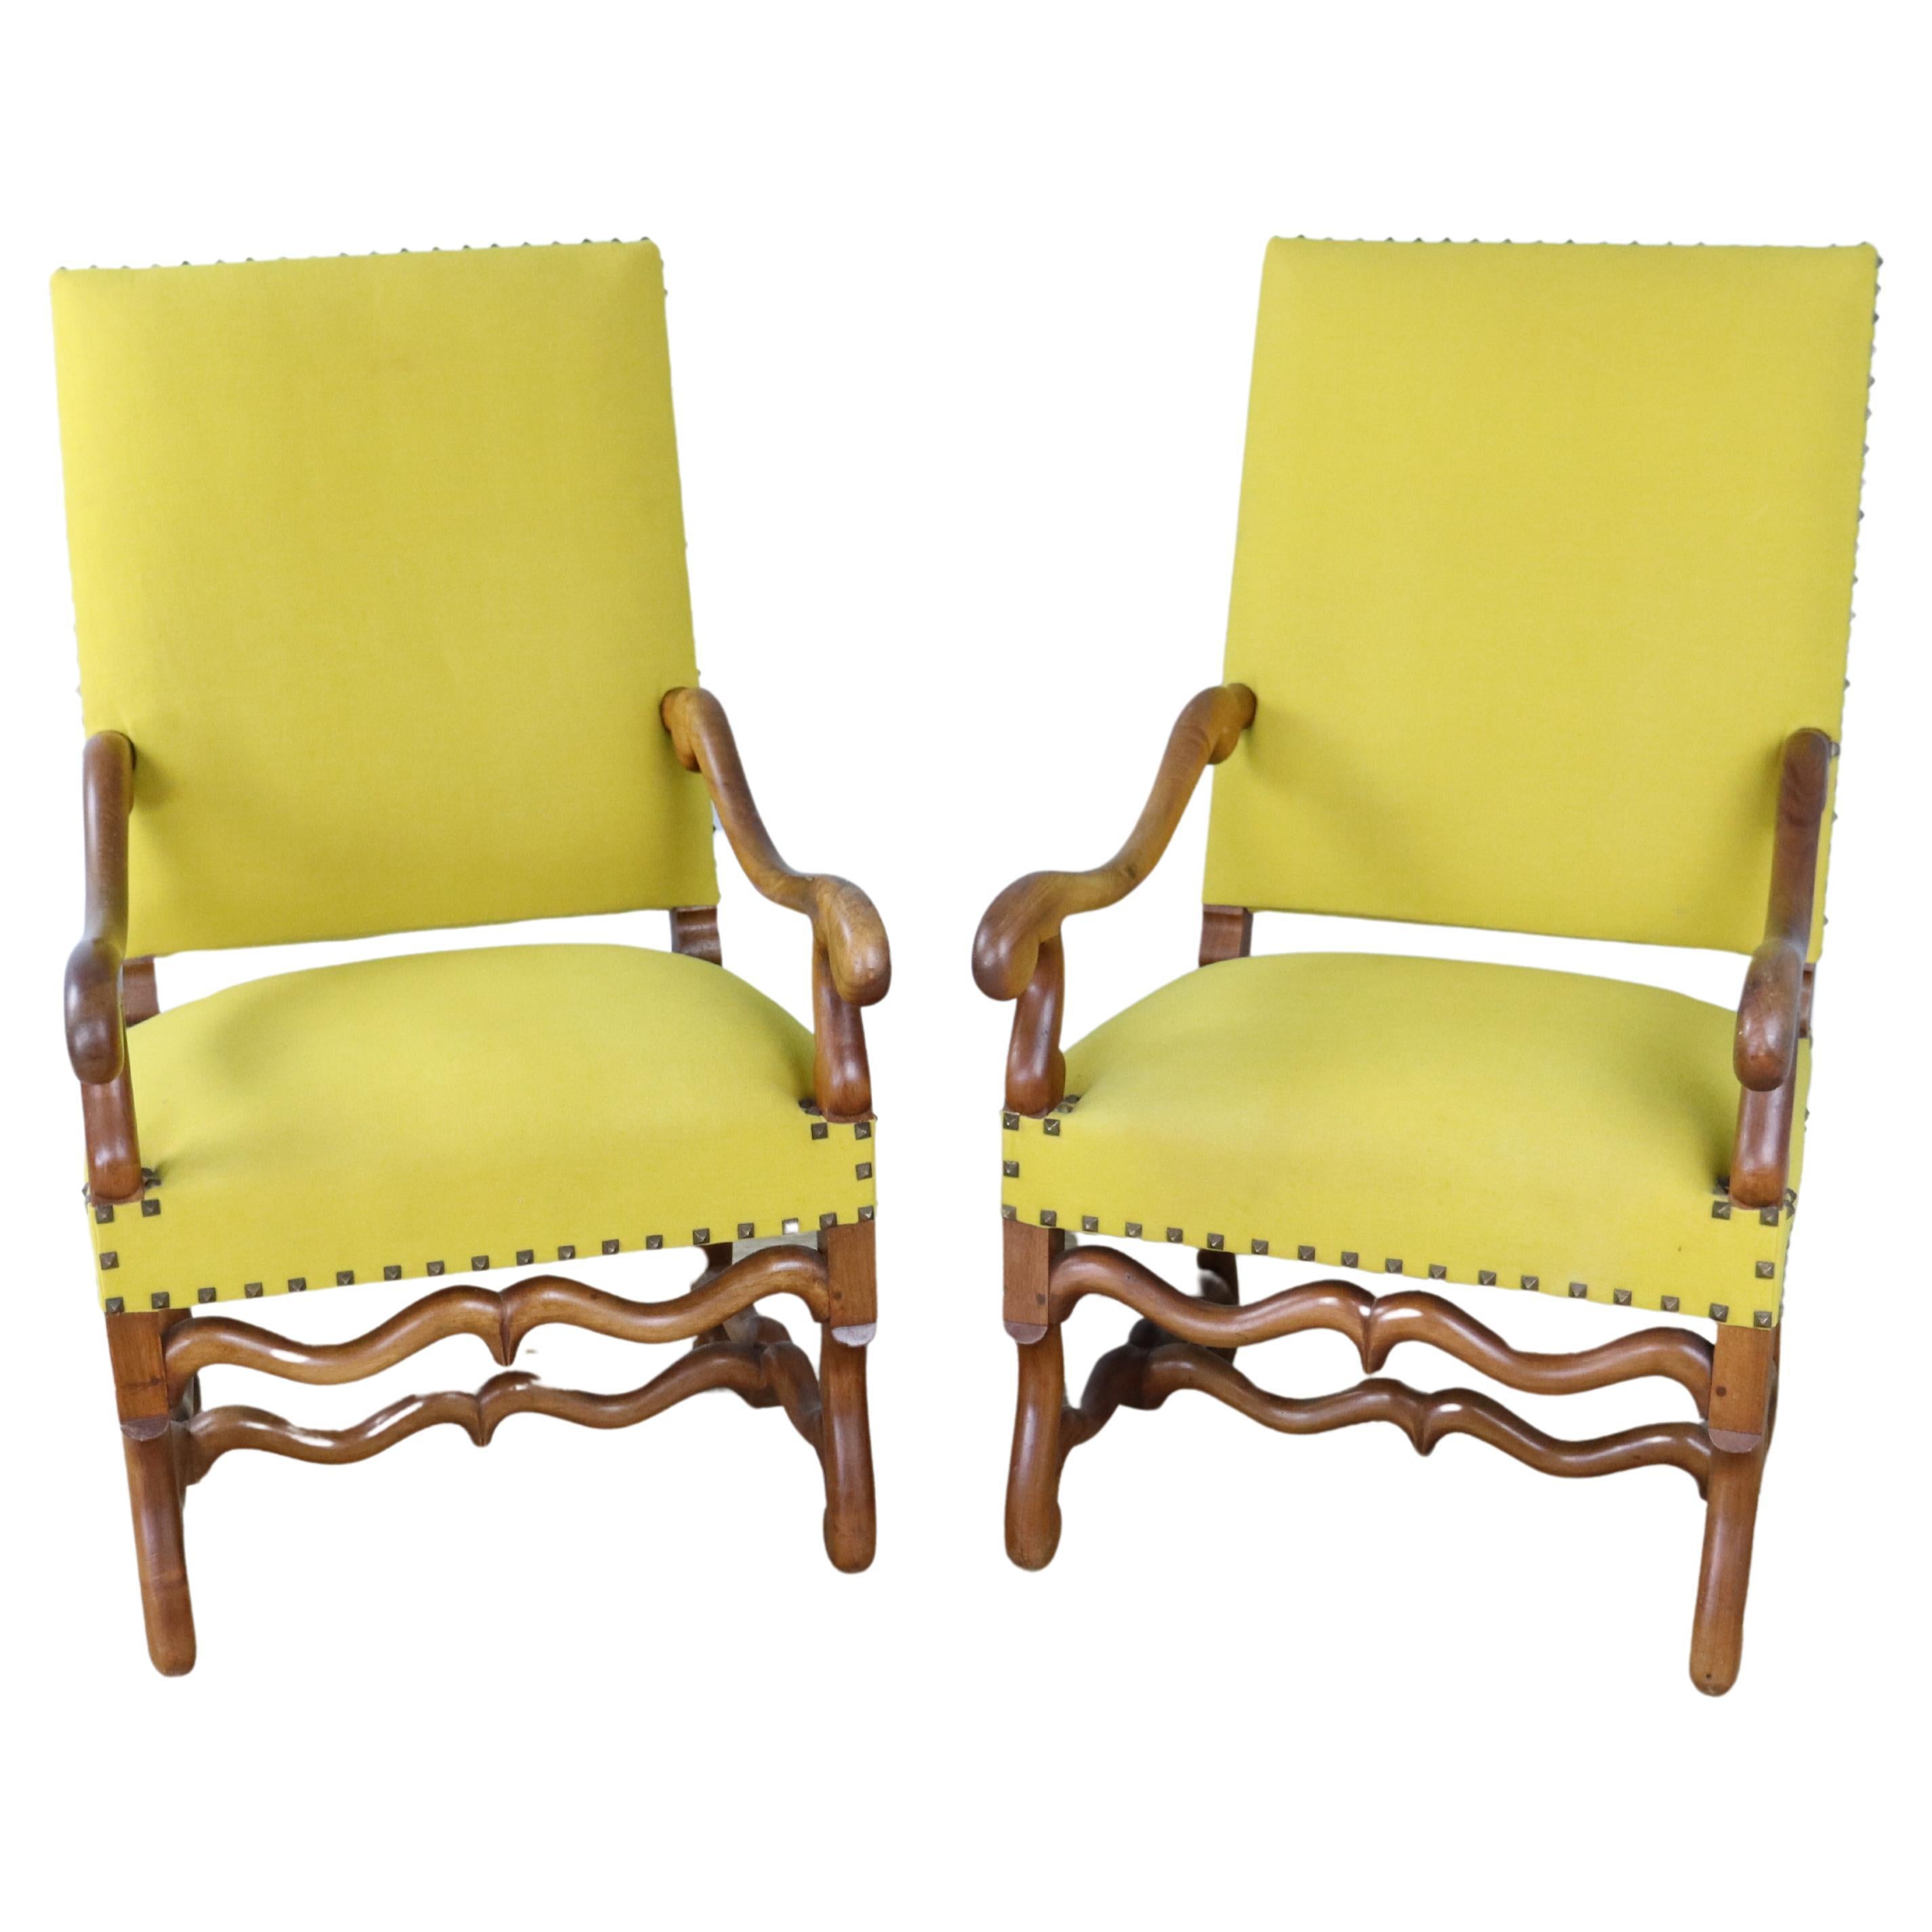 Pair of French Walnut Armchairs, New Yellow Upholstery For Sale